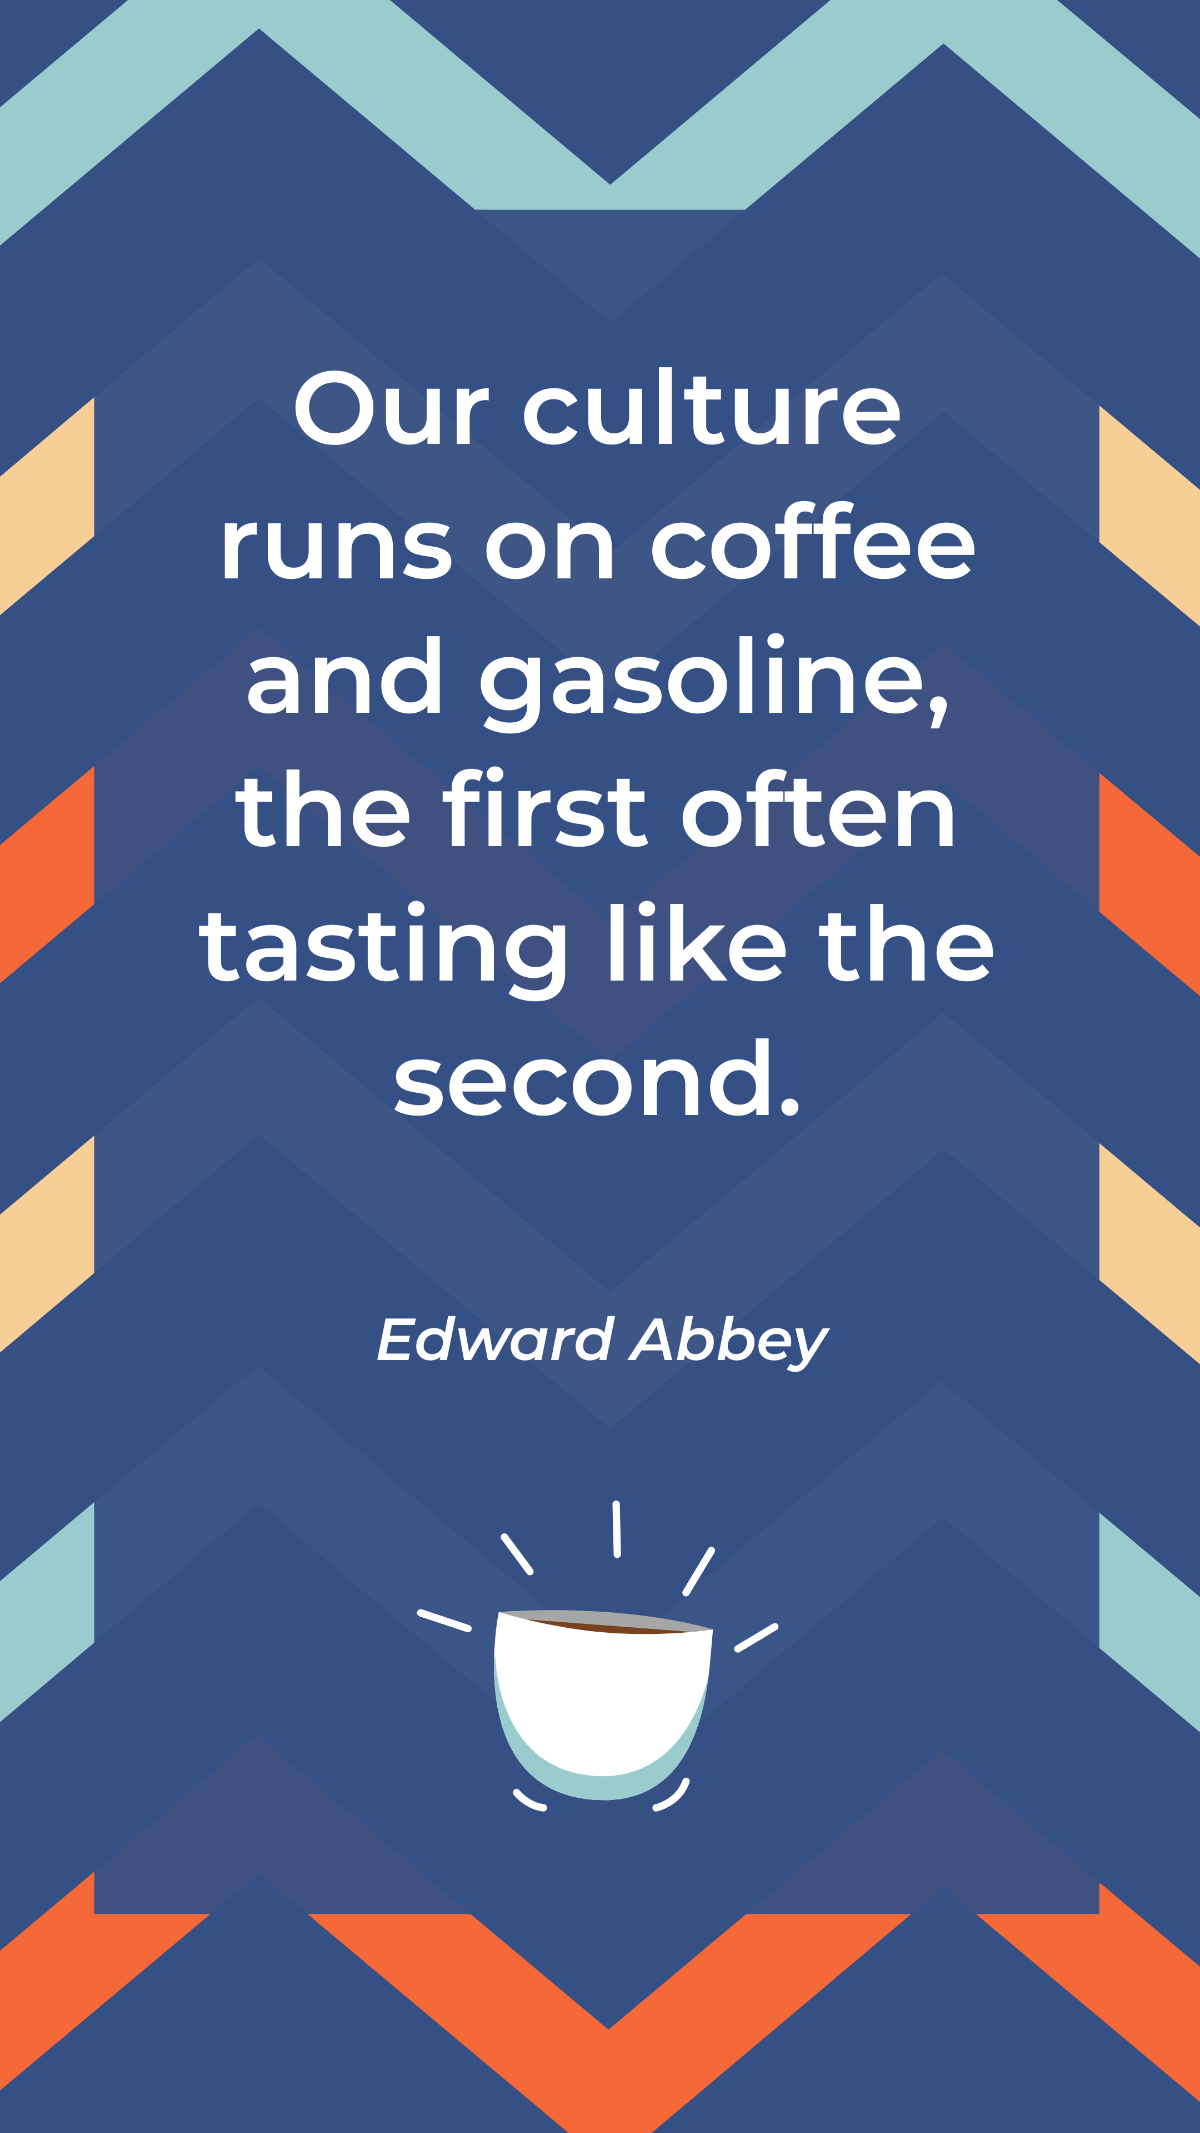 Edward Abbey - Our culture runs on coffee and gasoline, the first often tasting like the second. Template